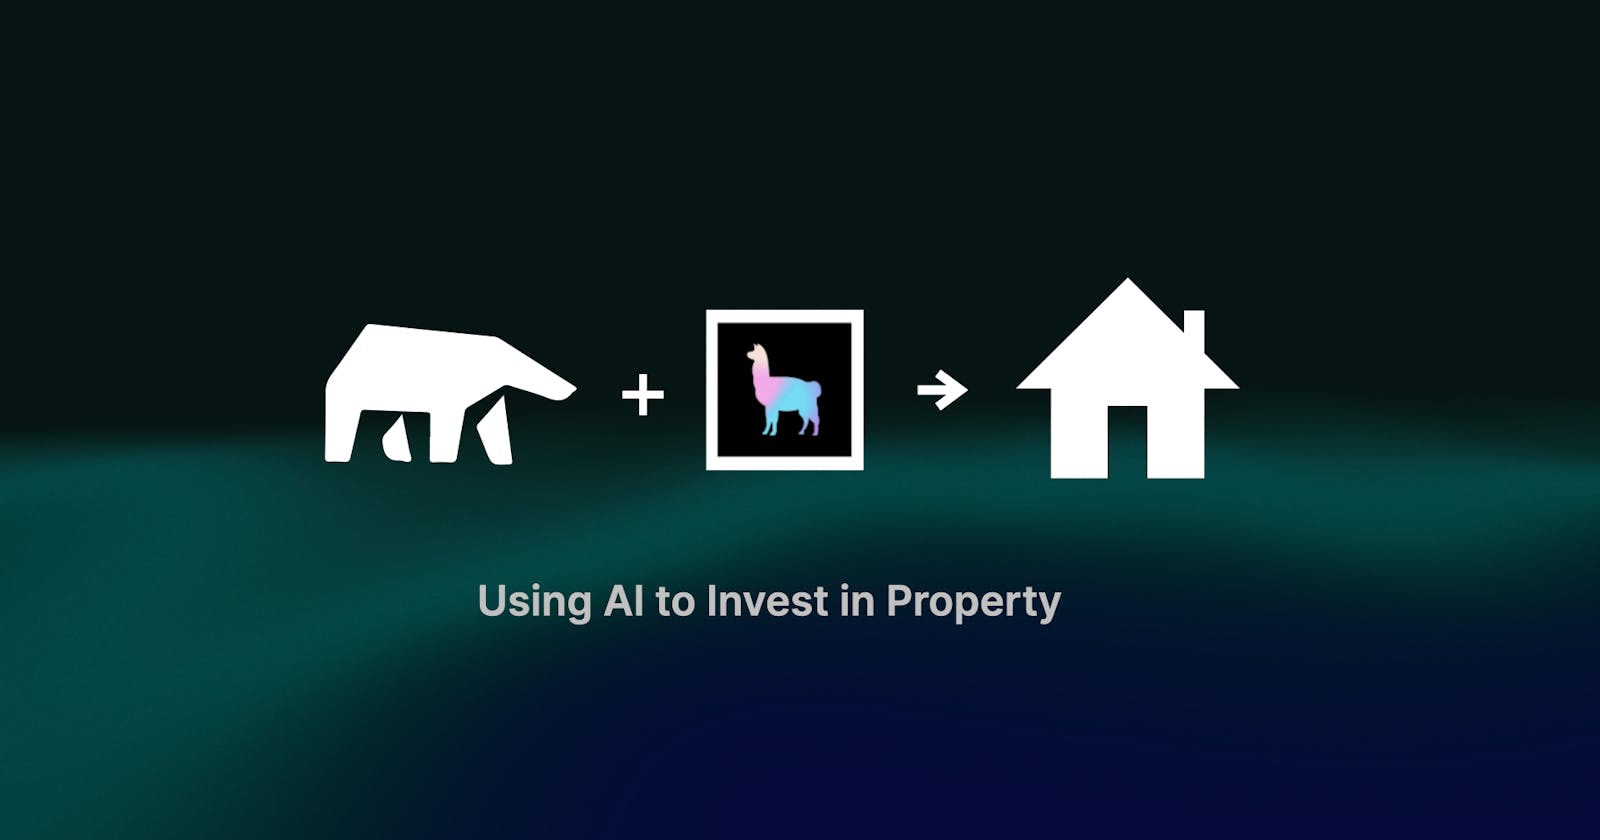 How to Build an AI-based Real Estate Recommendation Agent